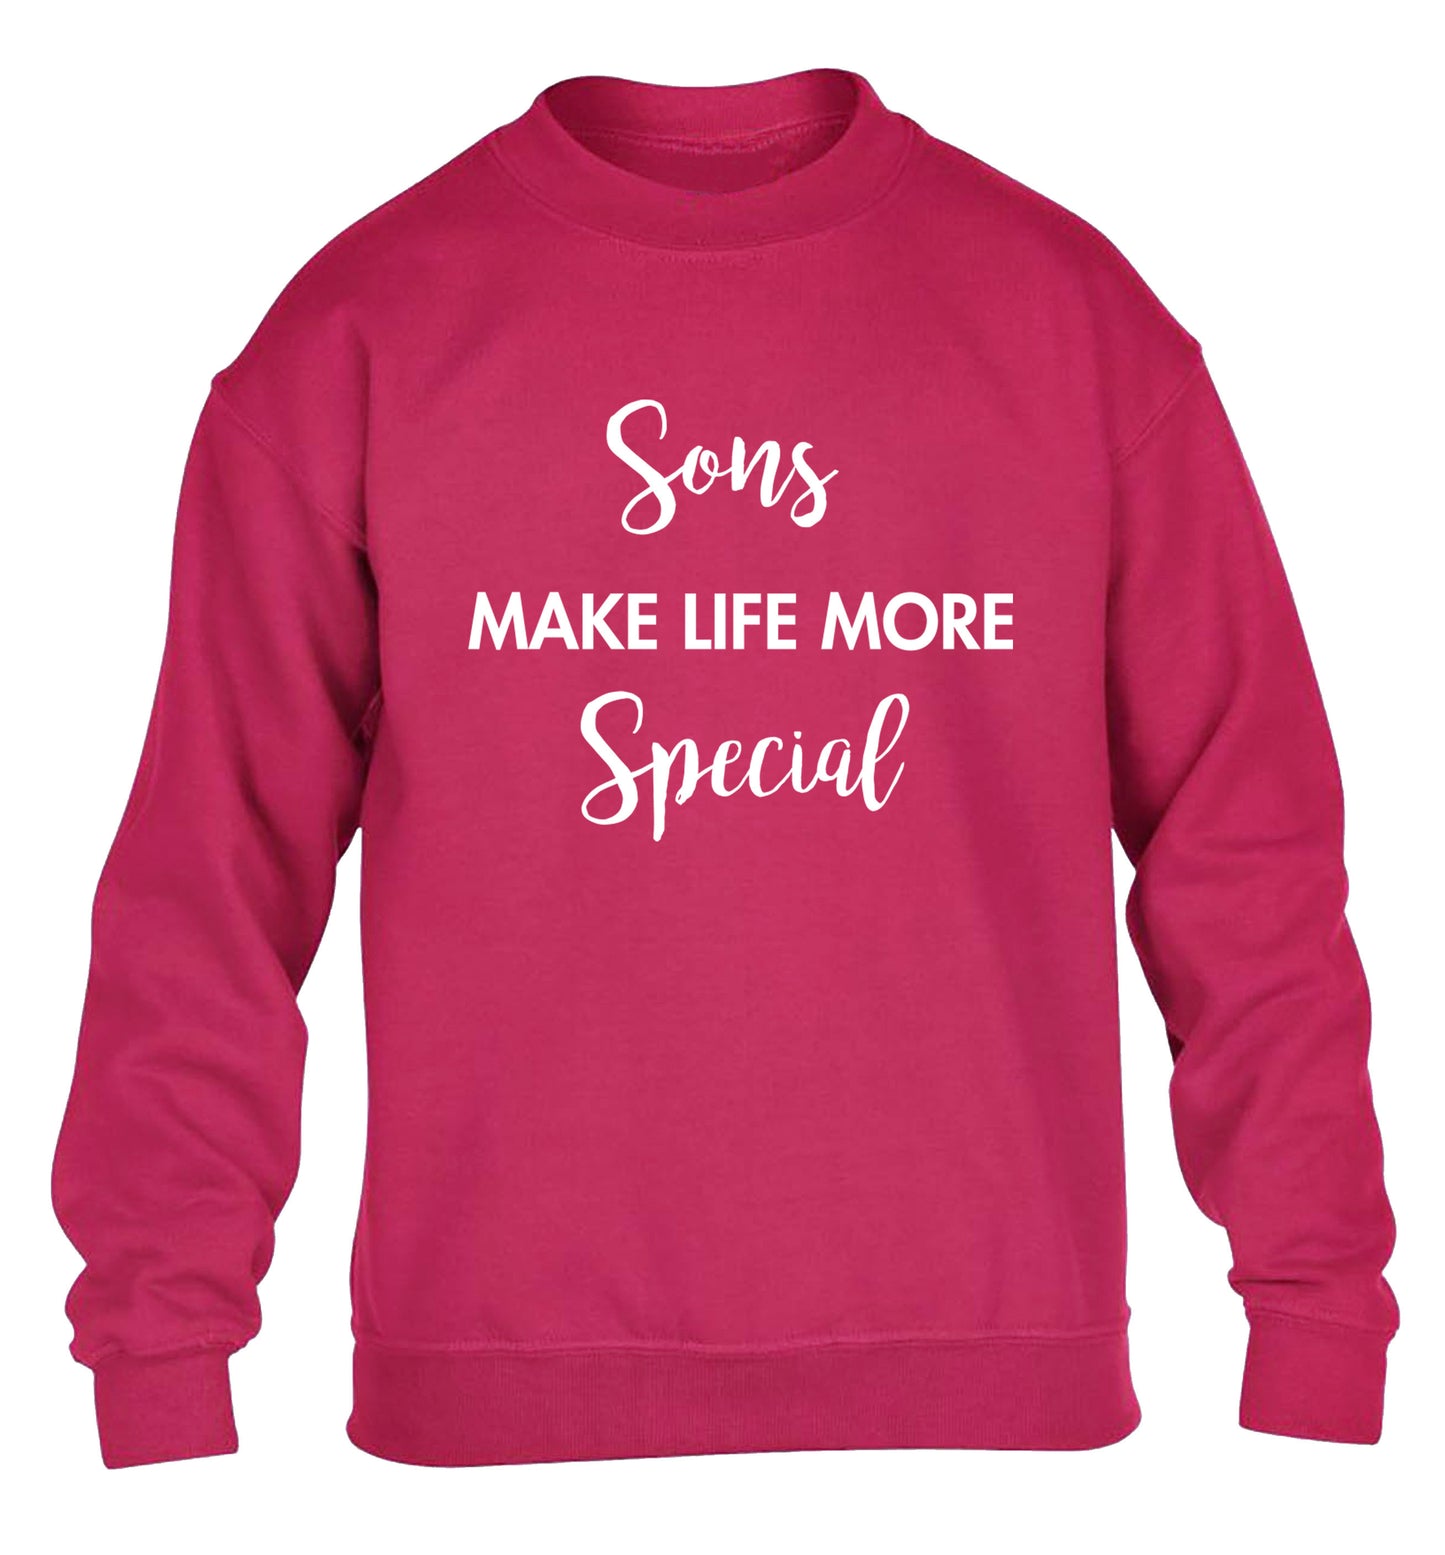 Daughters make life more special children's pink sweater 12-14 Years